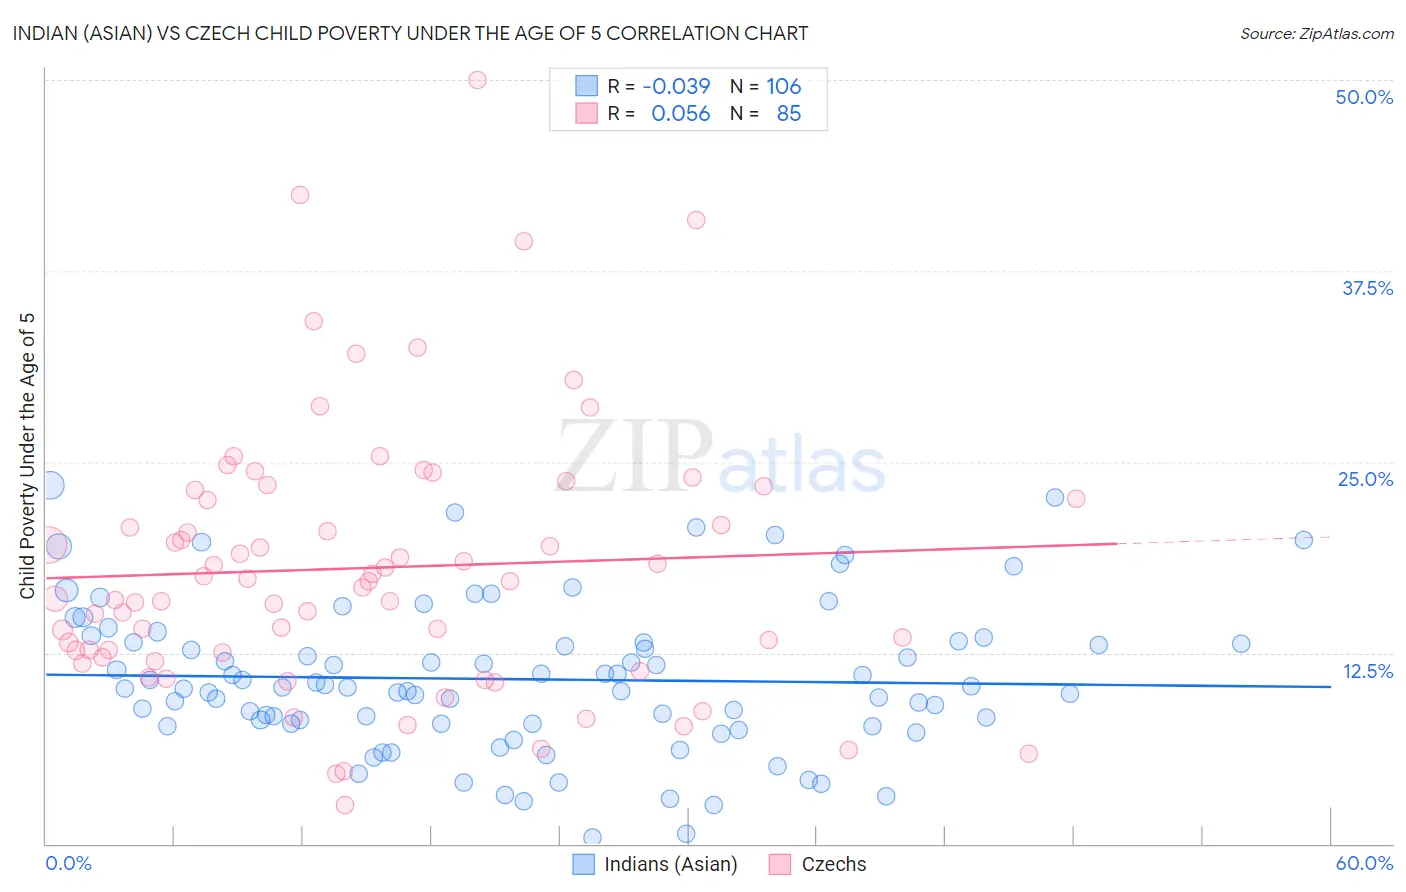 Indian (Asian) vs Czech Child Poverty Under the Age of 5